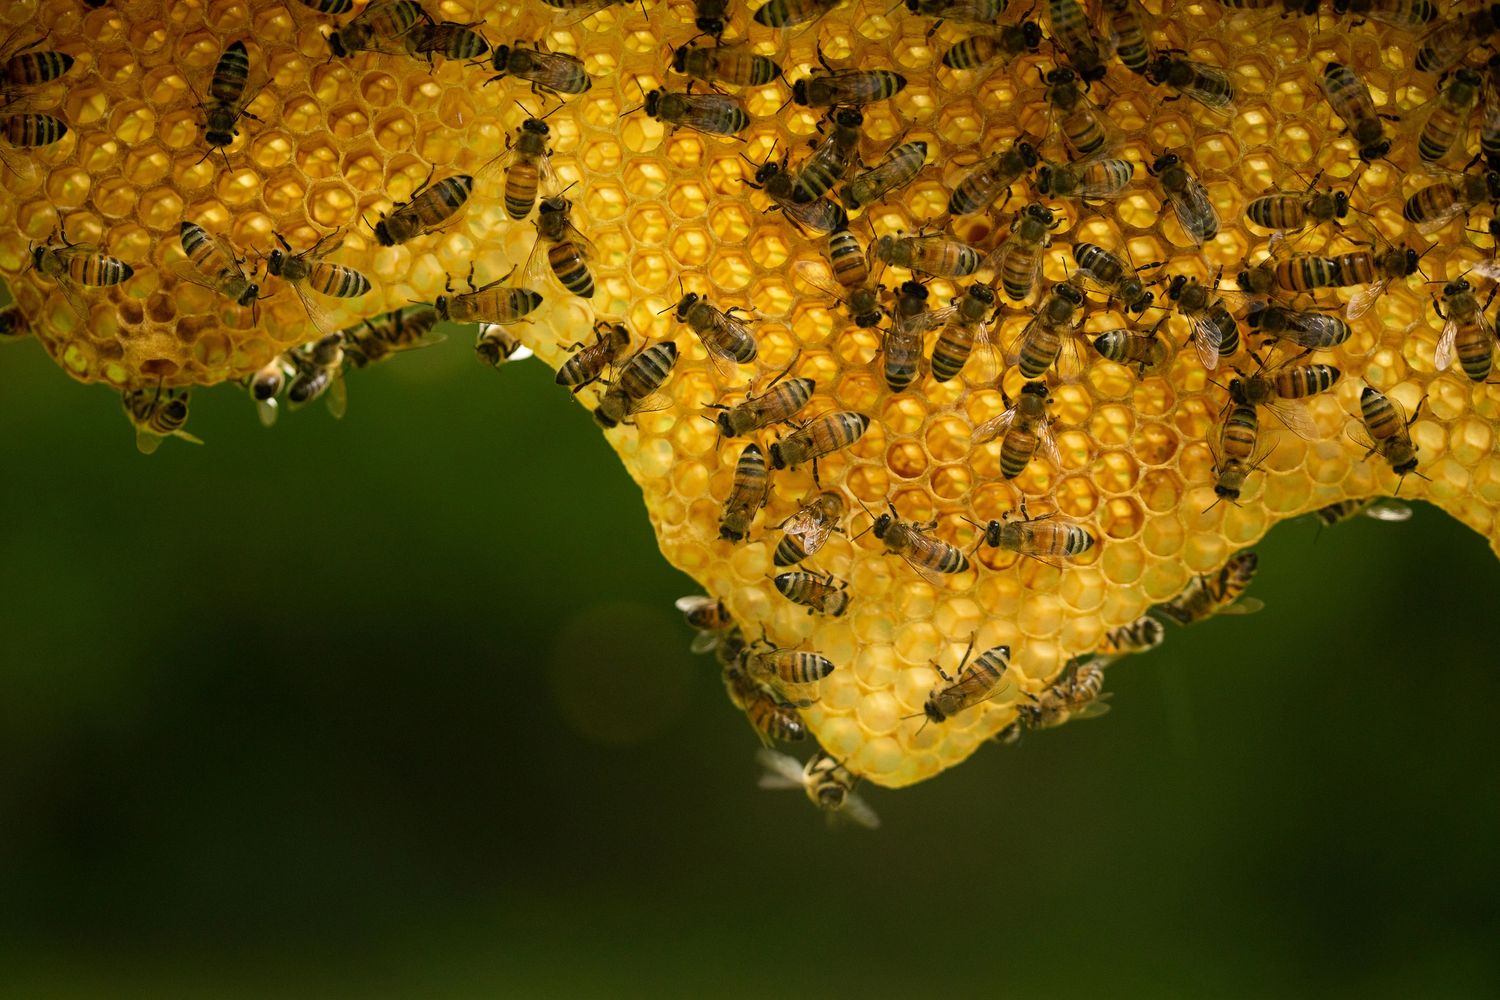 Worker bees tending to a frame of natural comb honey glowing in sunlight. Photo by Annie O'Neill